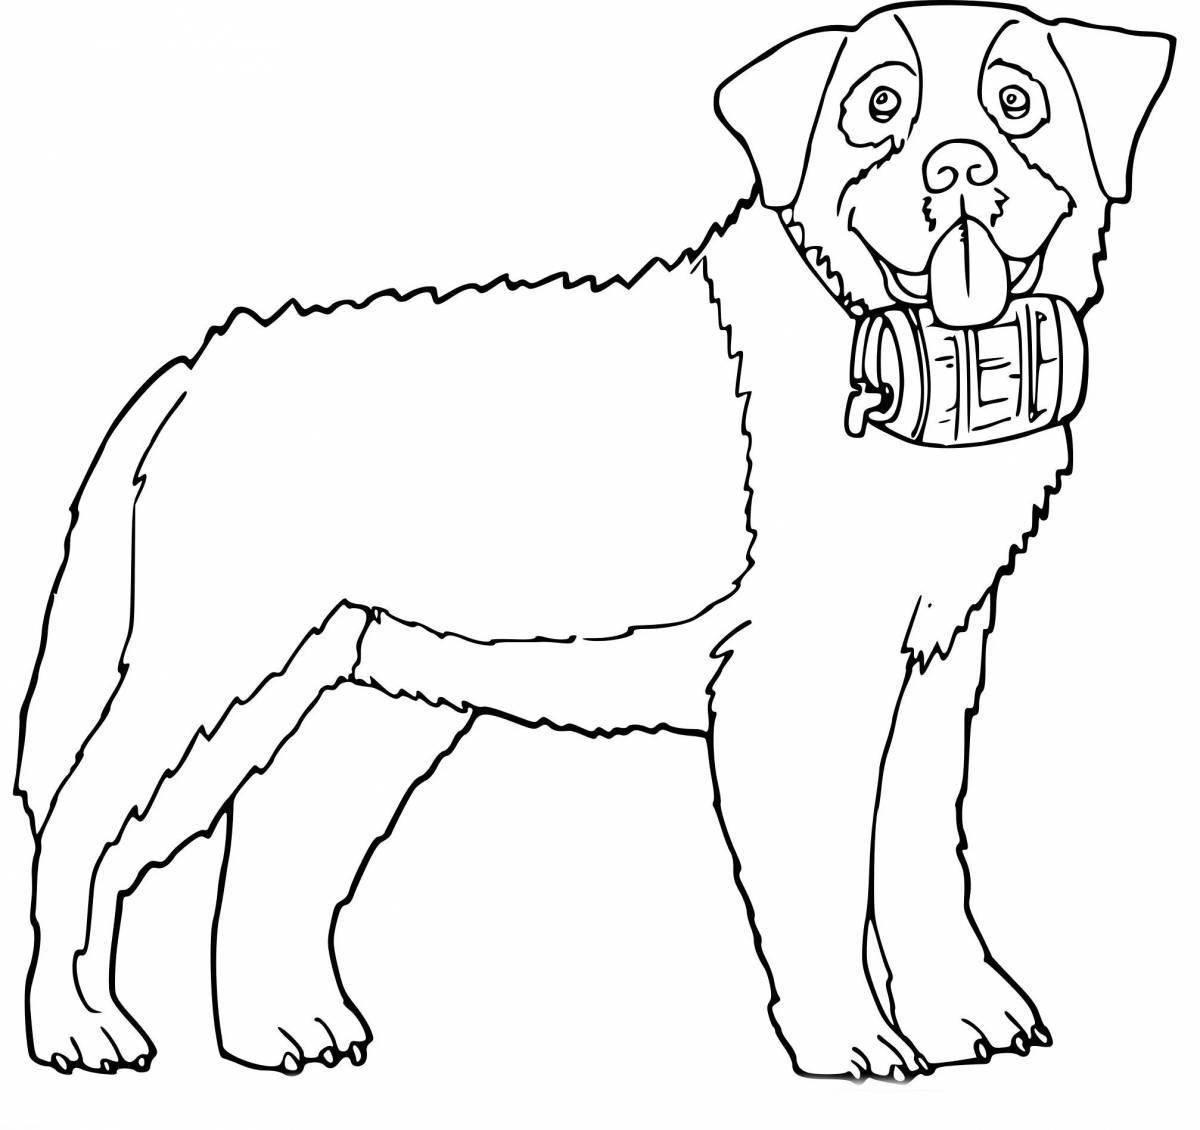 Amazing service dogs coloring pages for kids